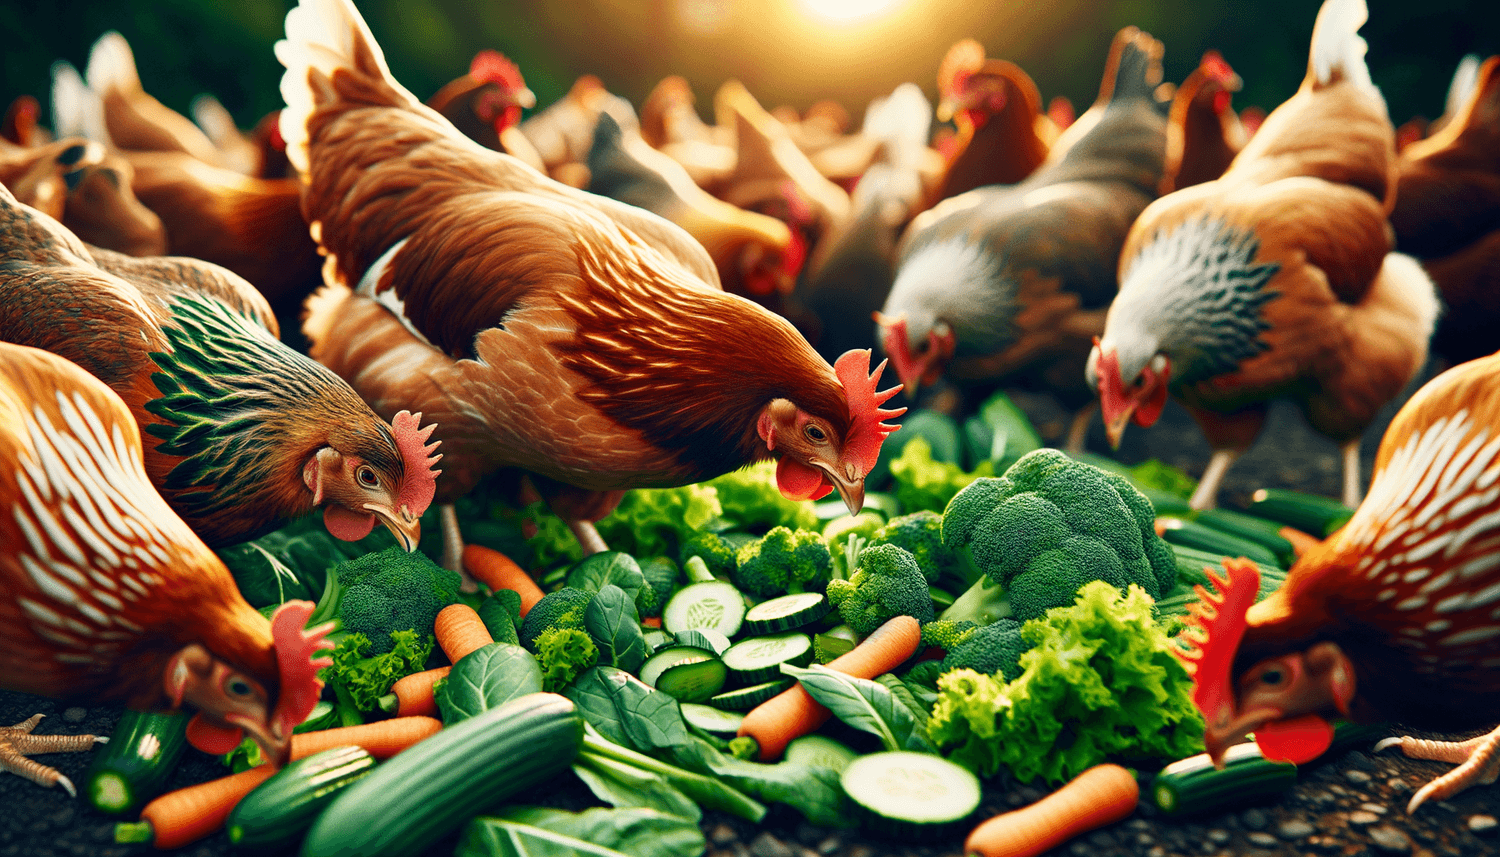 Can Chickens Eat Greens?